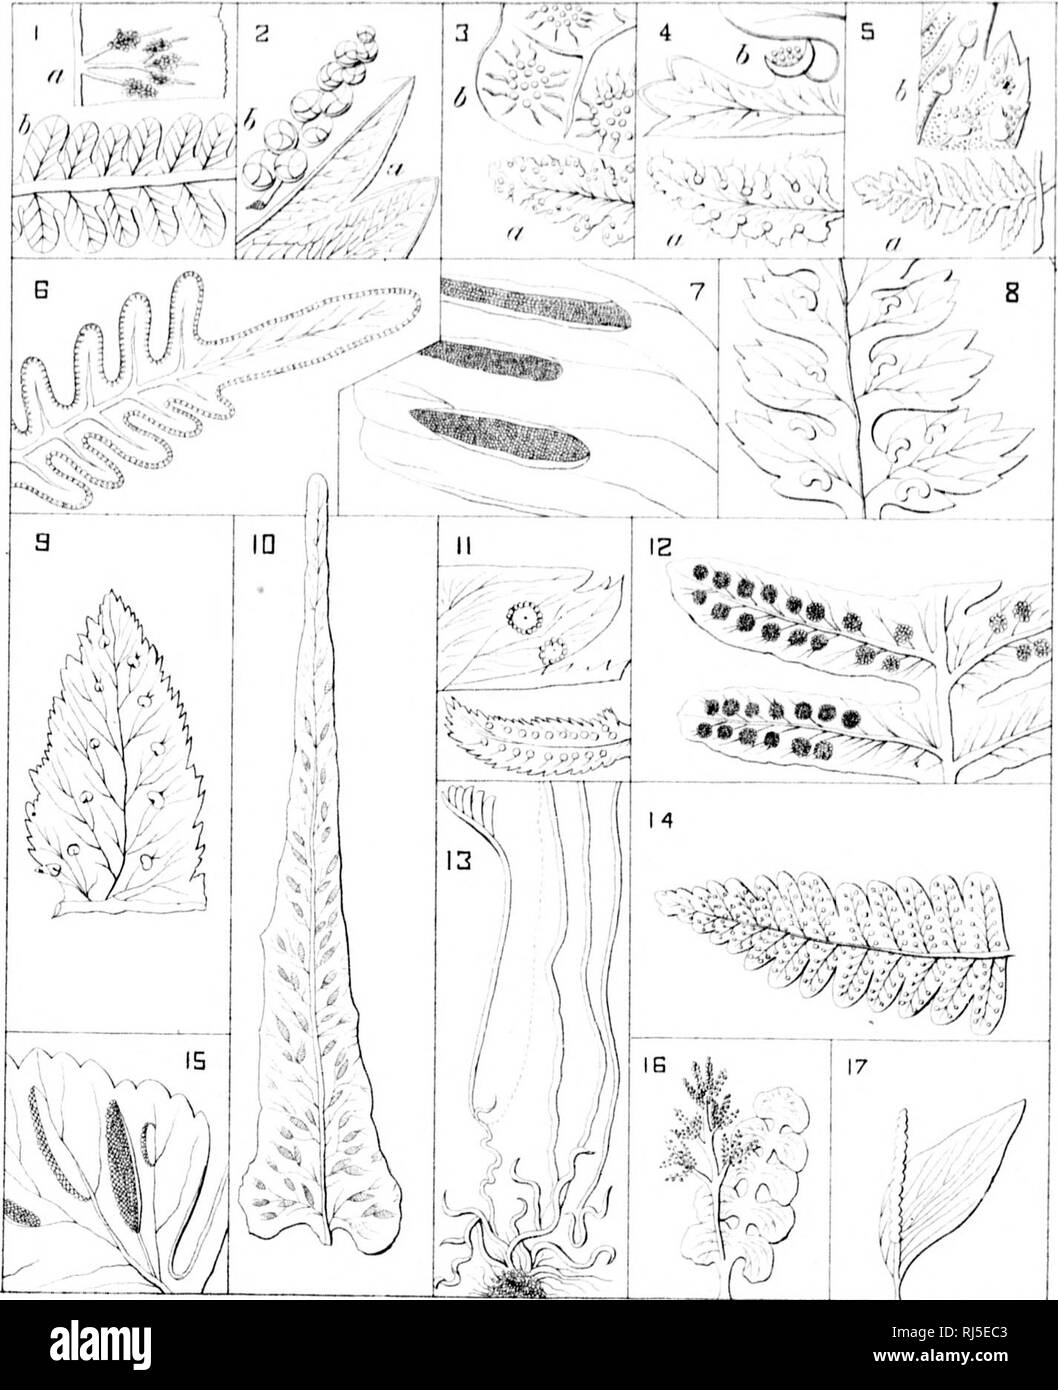 . How plants grow [microform] : a simple introduction to structural botany with a popular flora, or an arrangement and description of common plants, both wild and cultivated. Botany; Ferns; Botanique; Fougères. A^A^IA|I ^EF^fvJS |LLU$TFATin[vl^ DF [] E [vJ E F^A. I. 5TRUTHDPTERI5 5. CYSTDPTERIB 3.LABTREA I3.5CHIZa1:a 2.QNDCLEA B.PTERI3 ID. CAMPTDSDRUS 14. PHEGDPTE PI5 3. WDDDBIA 7. SCDLDPENDRIUM II.PDLYSTICLIUM I5.A5PLENIUM 4. DENNSTAEDTIA S.ATHYRIUM 12 . PD LYPDDIUM IB . BDTR YCH lUM IZ.DPHIDDLDSSUM ;. Please note that these images are extracted from scanned page images that may have been d Stock Photo